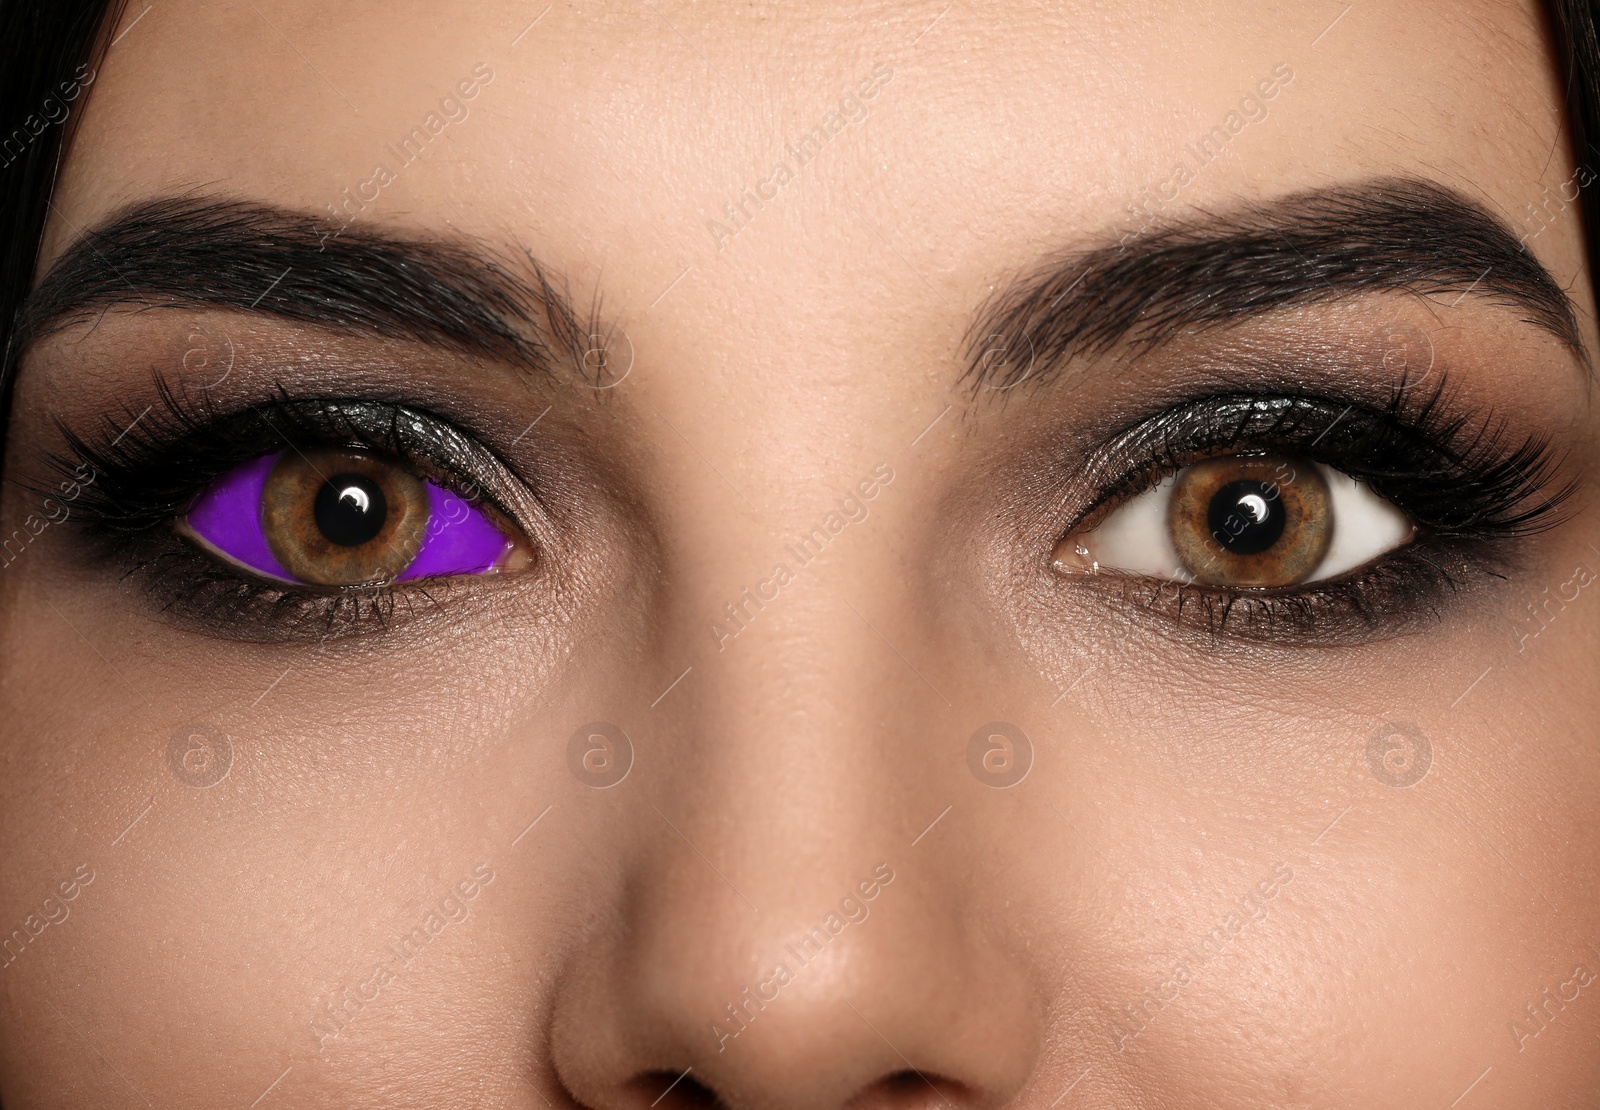 Image of Closeup view of woman with eyeball tattoo